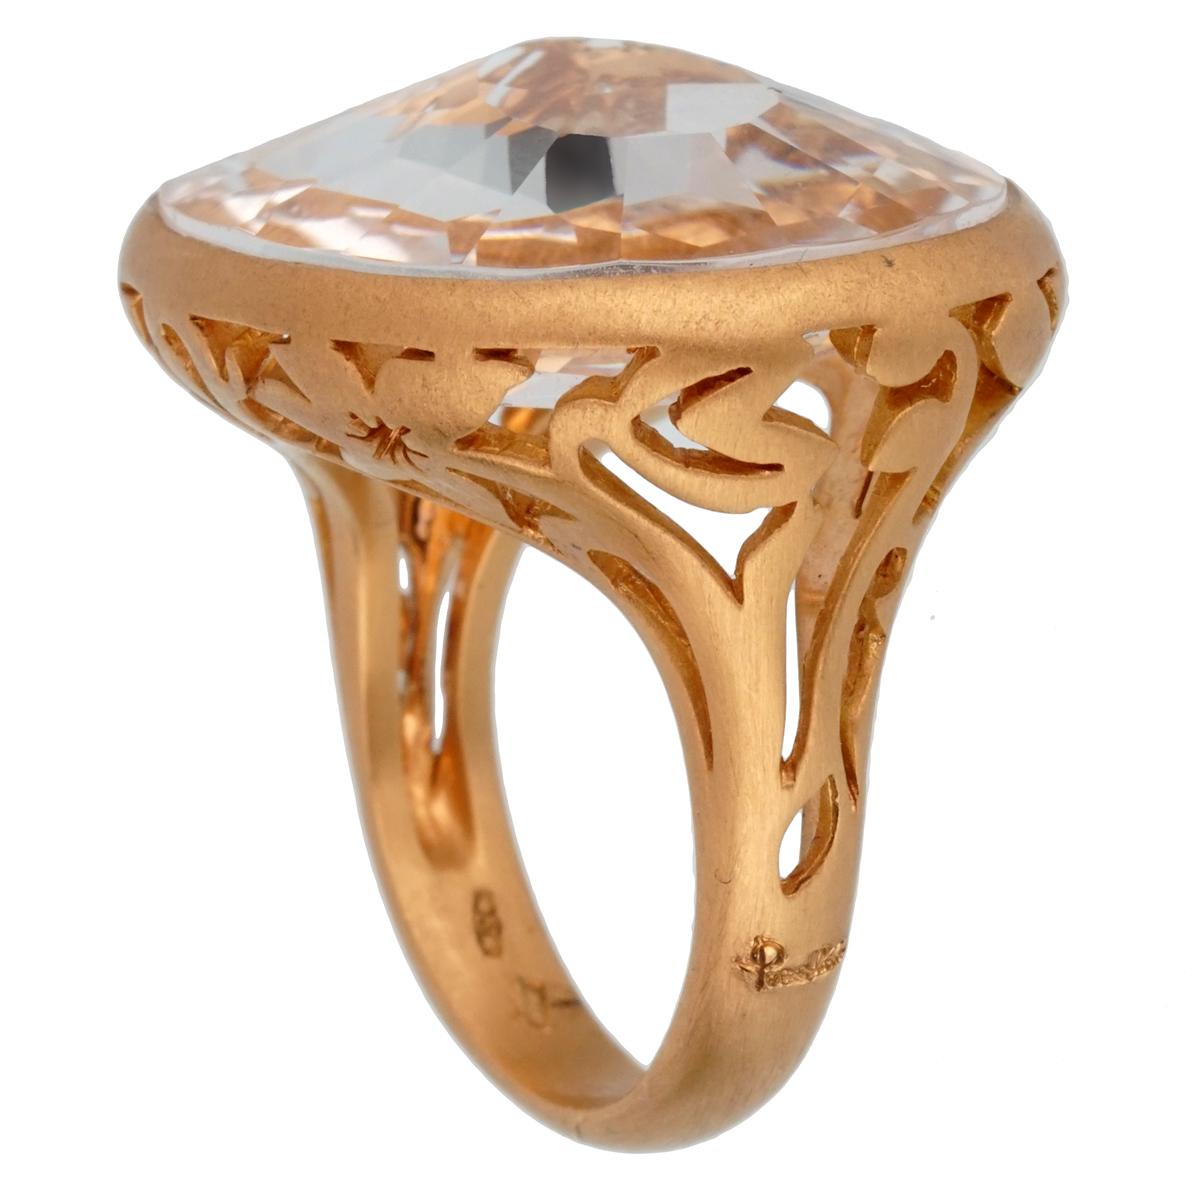 A chic brand new Pomellato cocktail ring showcasing a 10.19ct White Quartz set in 18k rose gold. The ring measures a size 6.25 and can be resized

Pomellato Retail: $4600
Sku: 2450